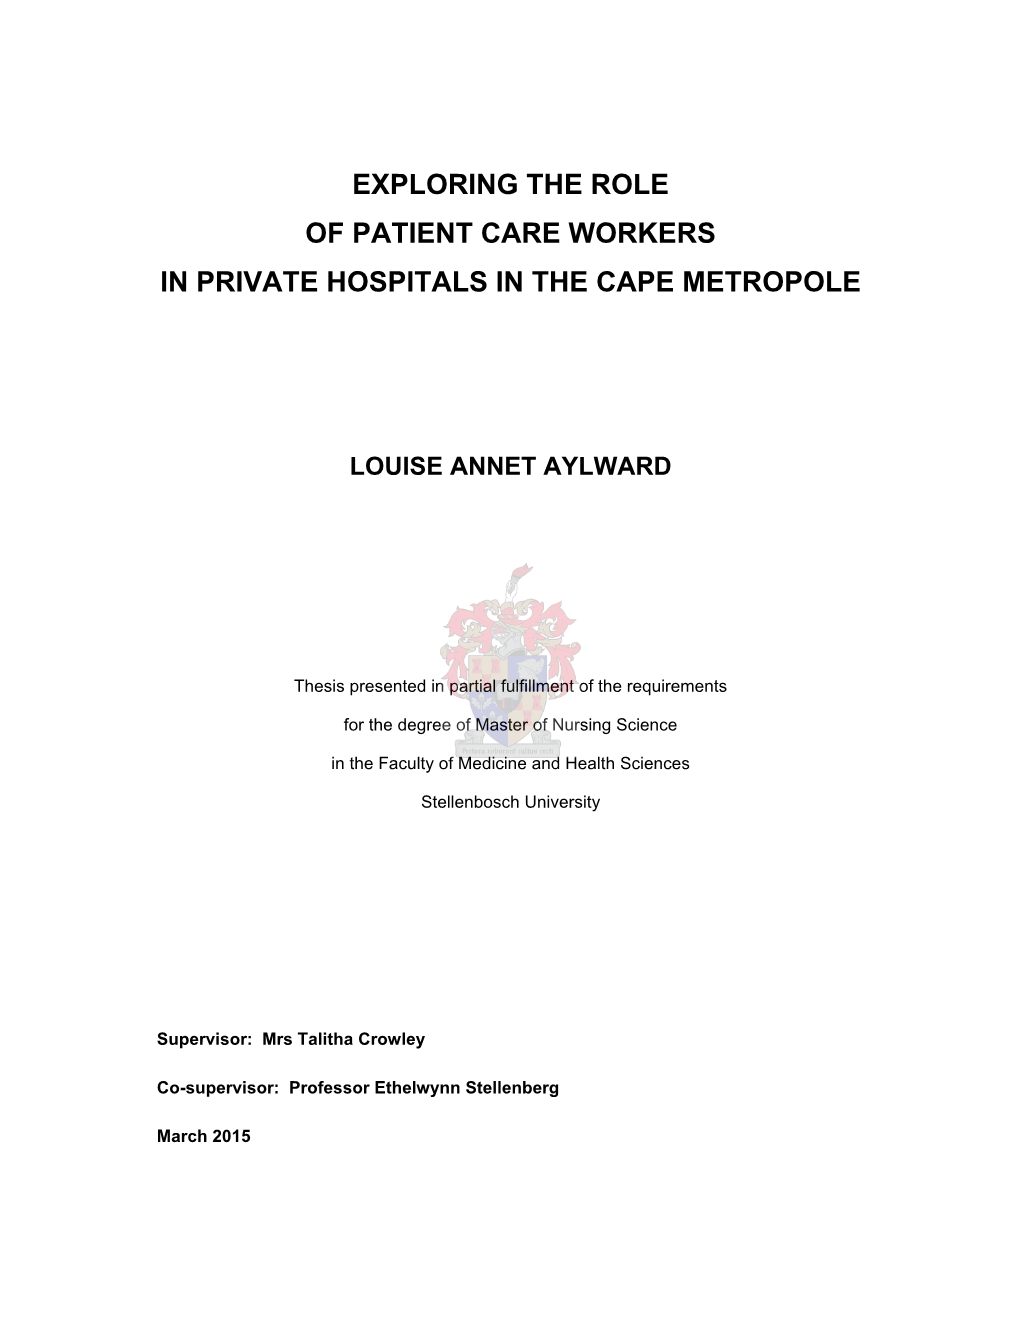 Exploring the Role of Patient Care Workers in Private Hospitals in the Cape Metropole